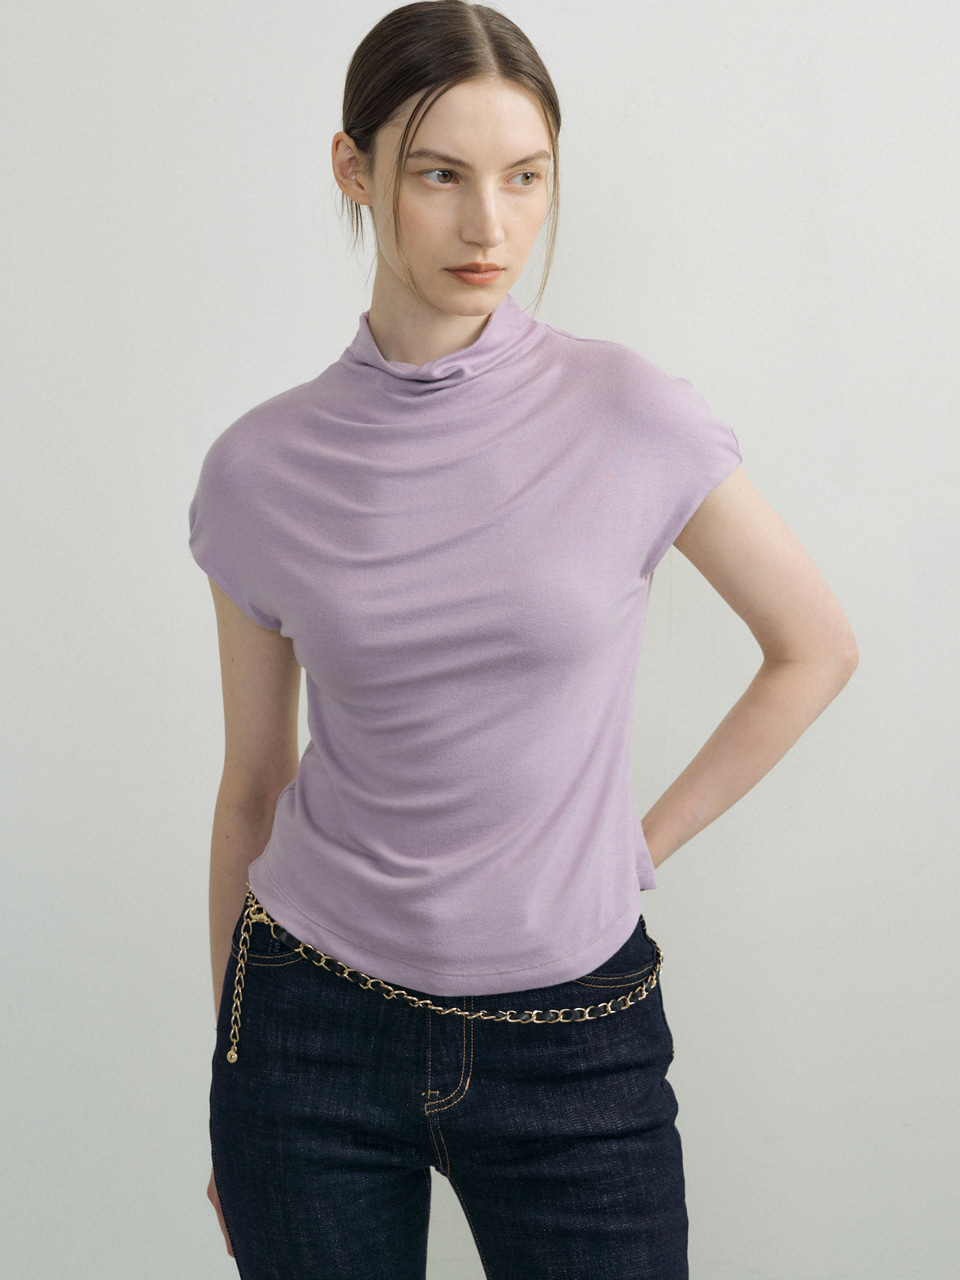 JERSEY COWL SLEEVELESS T (3color)